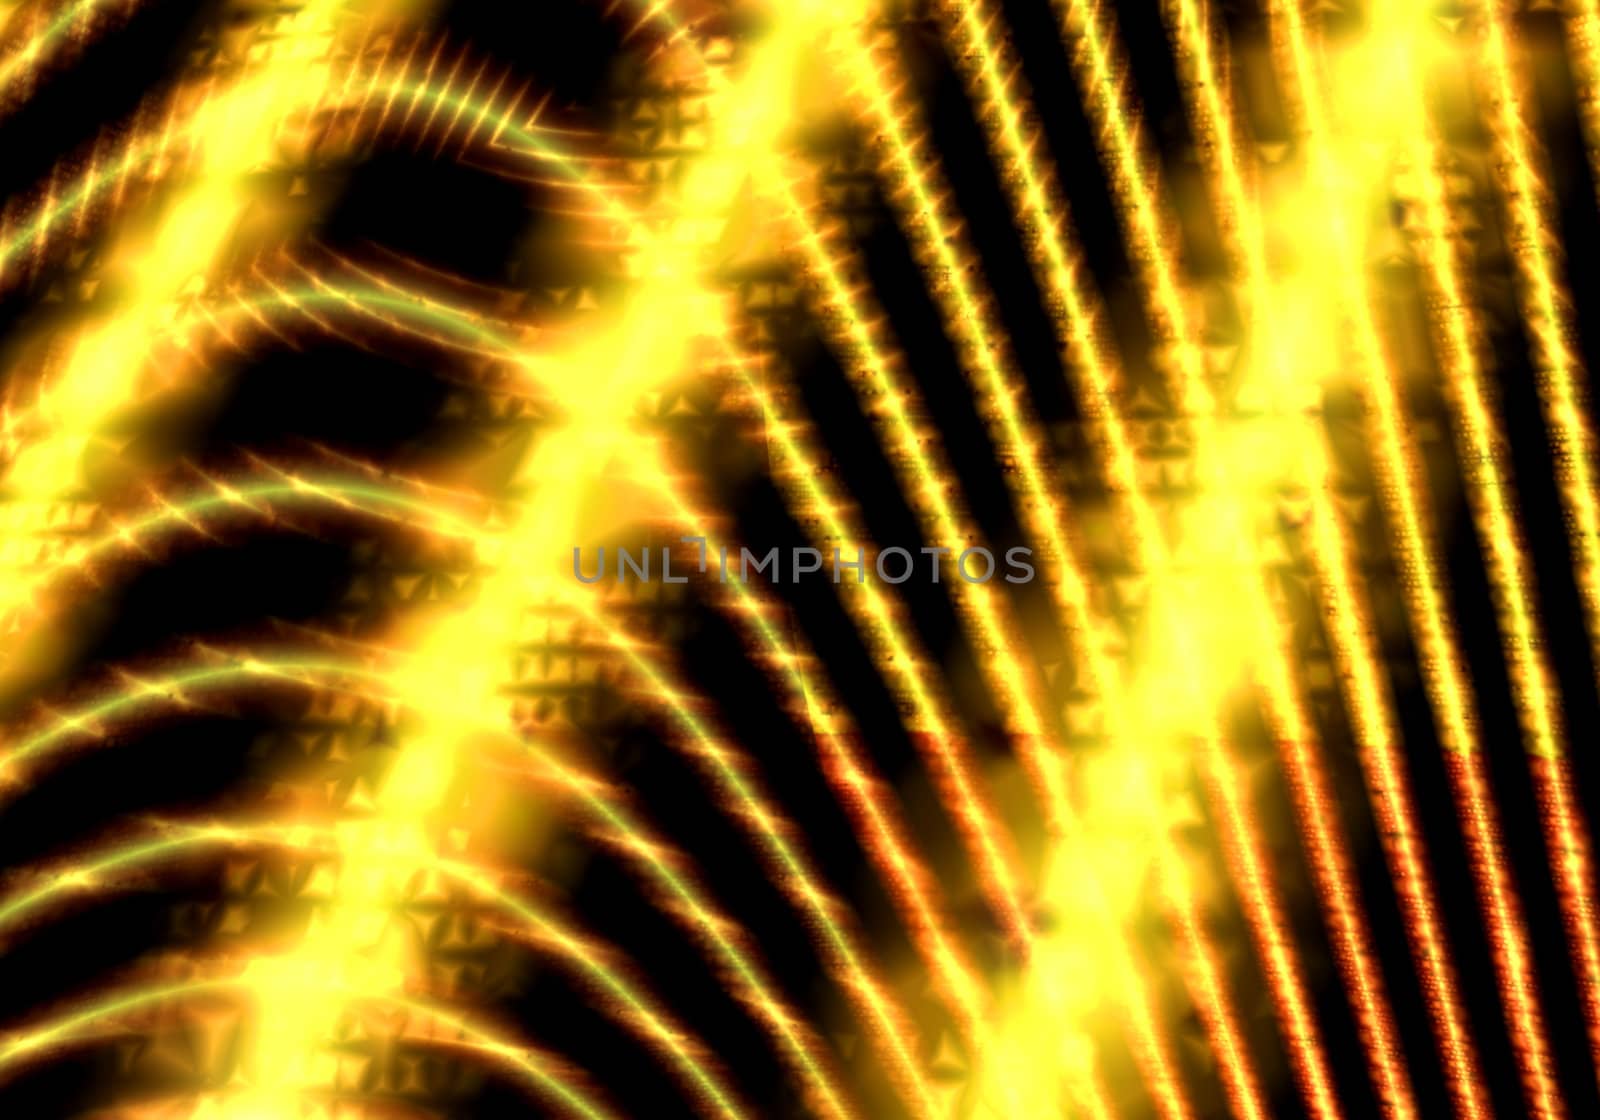 abstract creative fantastic image of metallic gold texture 